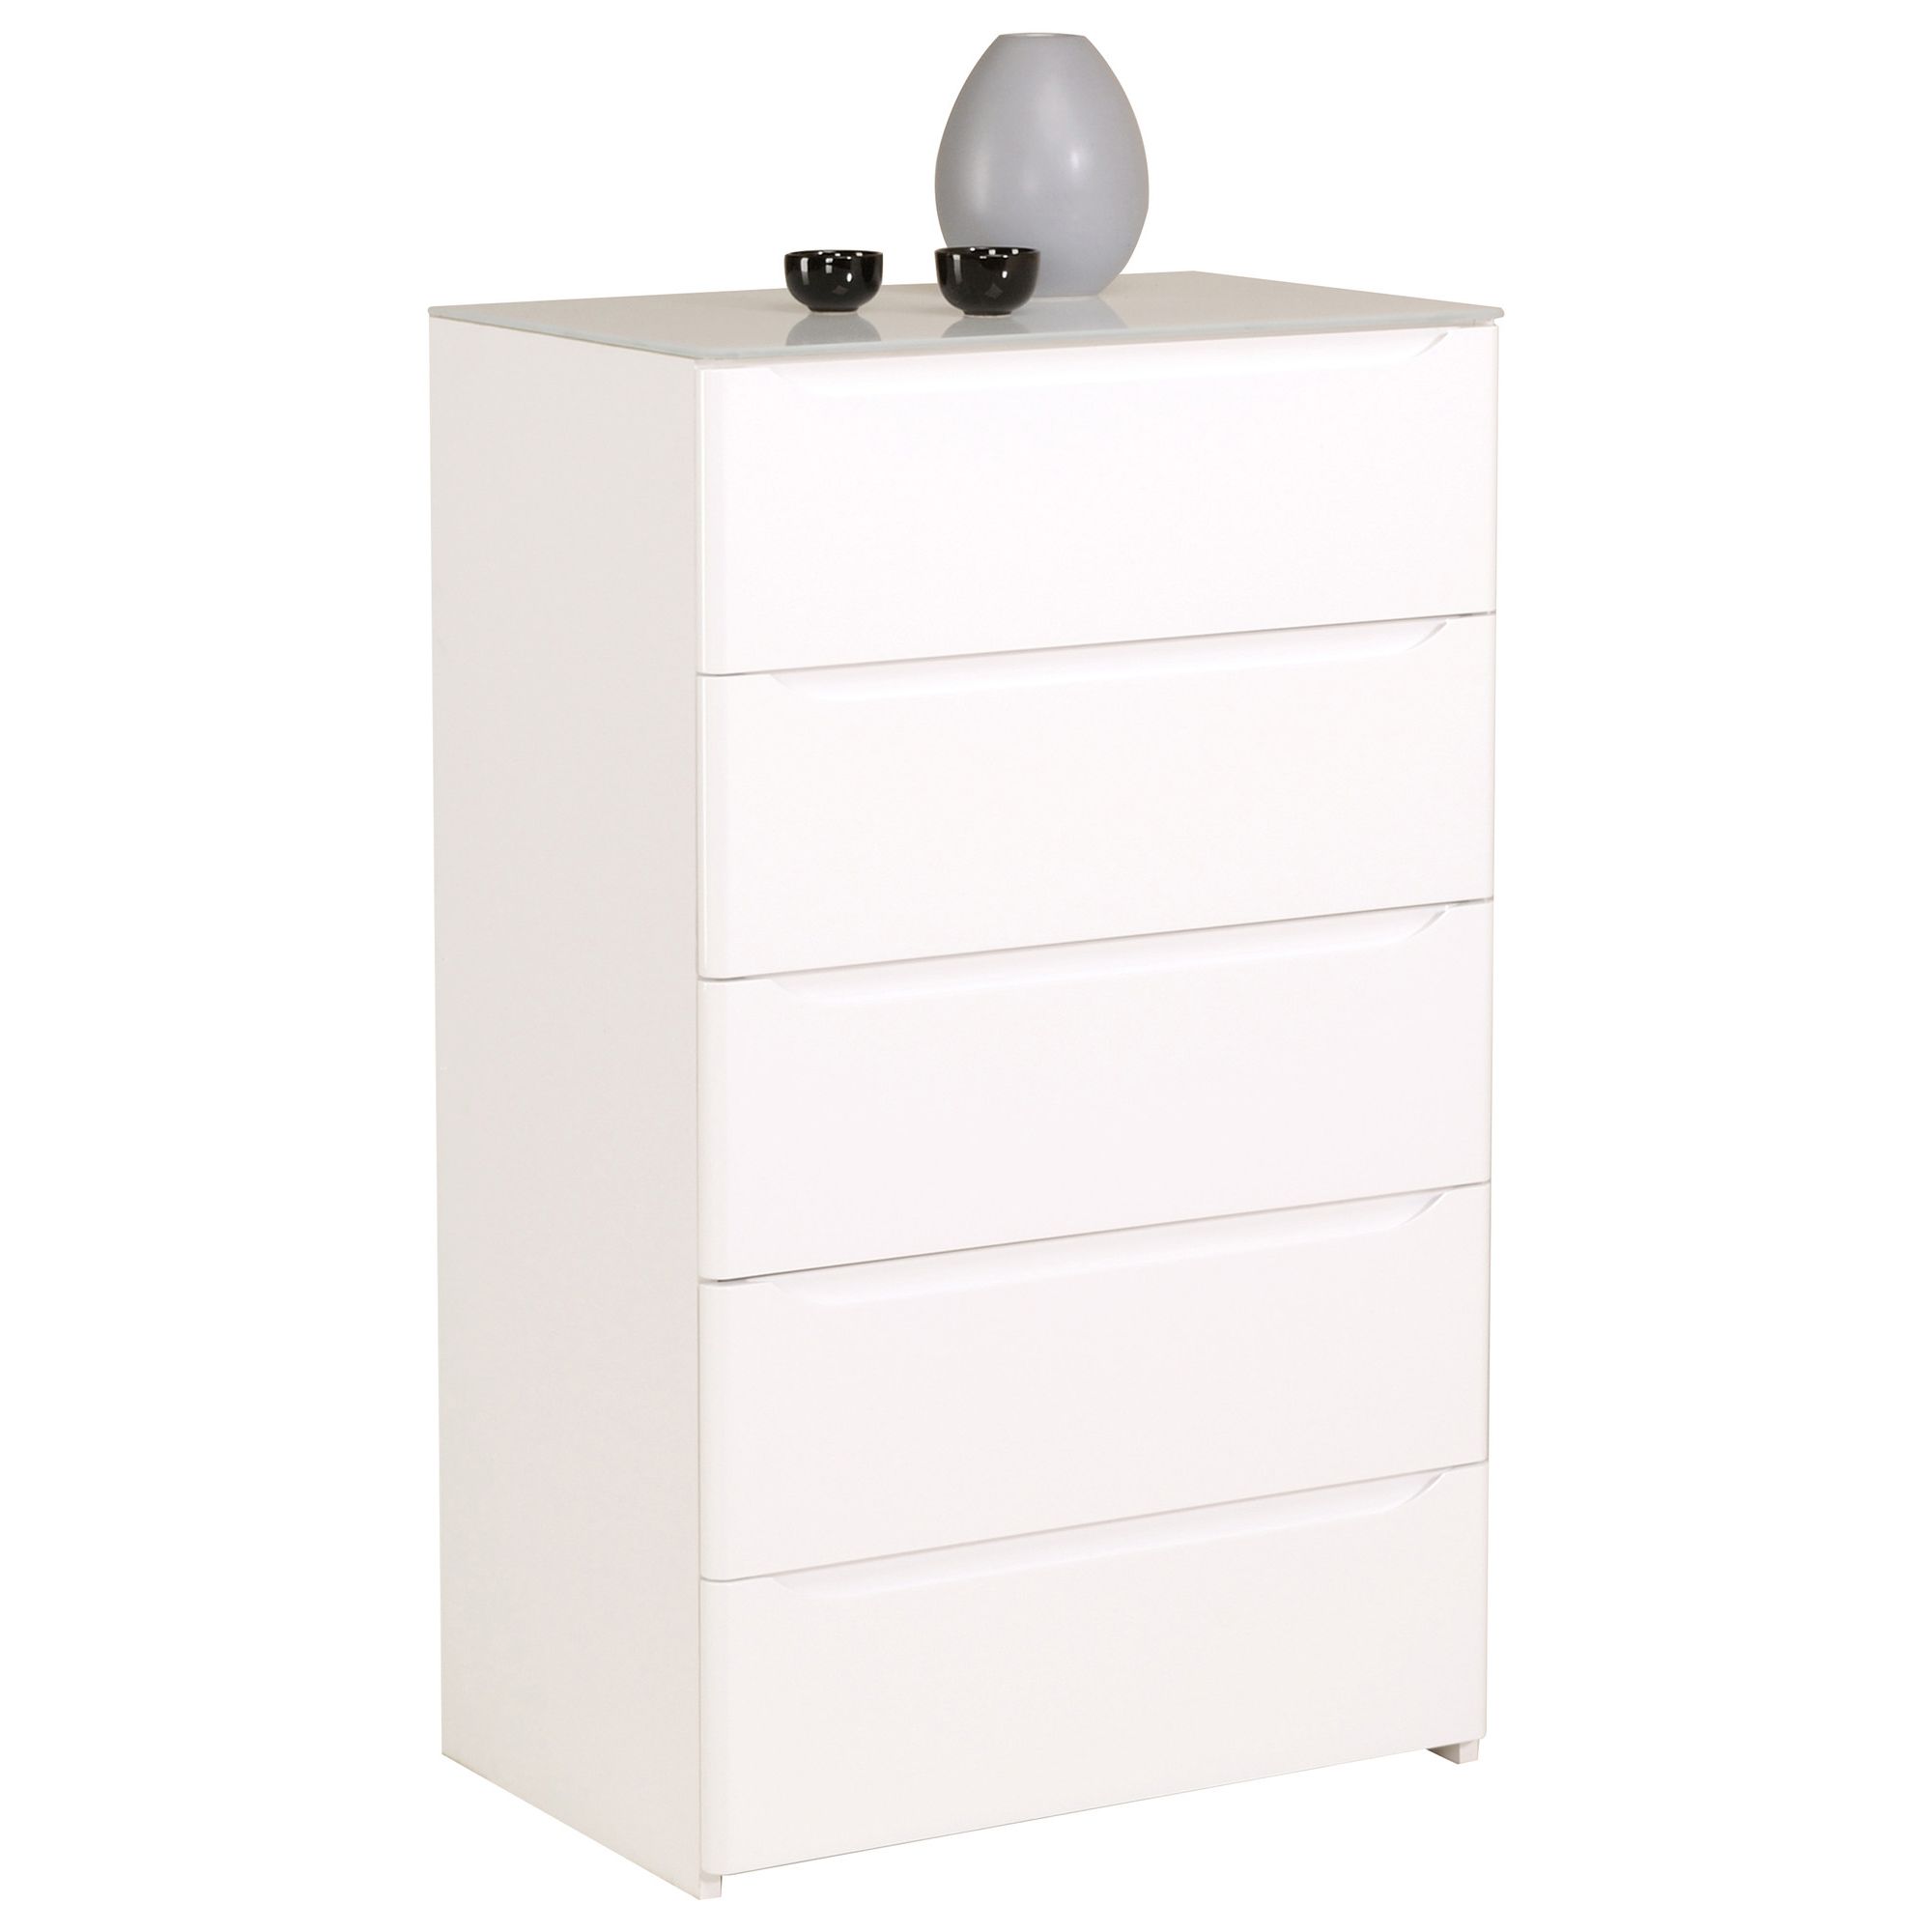 Parisot Ambynight Chest of 5 Drawers at Tesco Direct